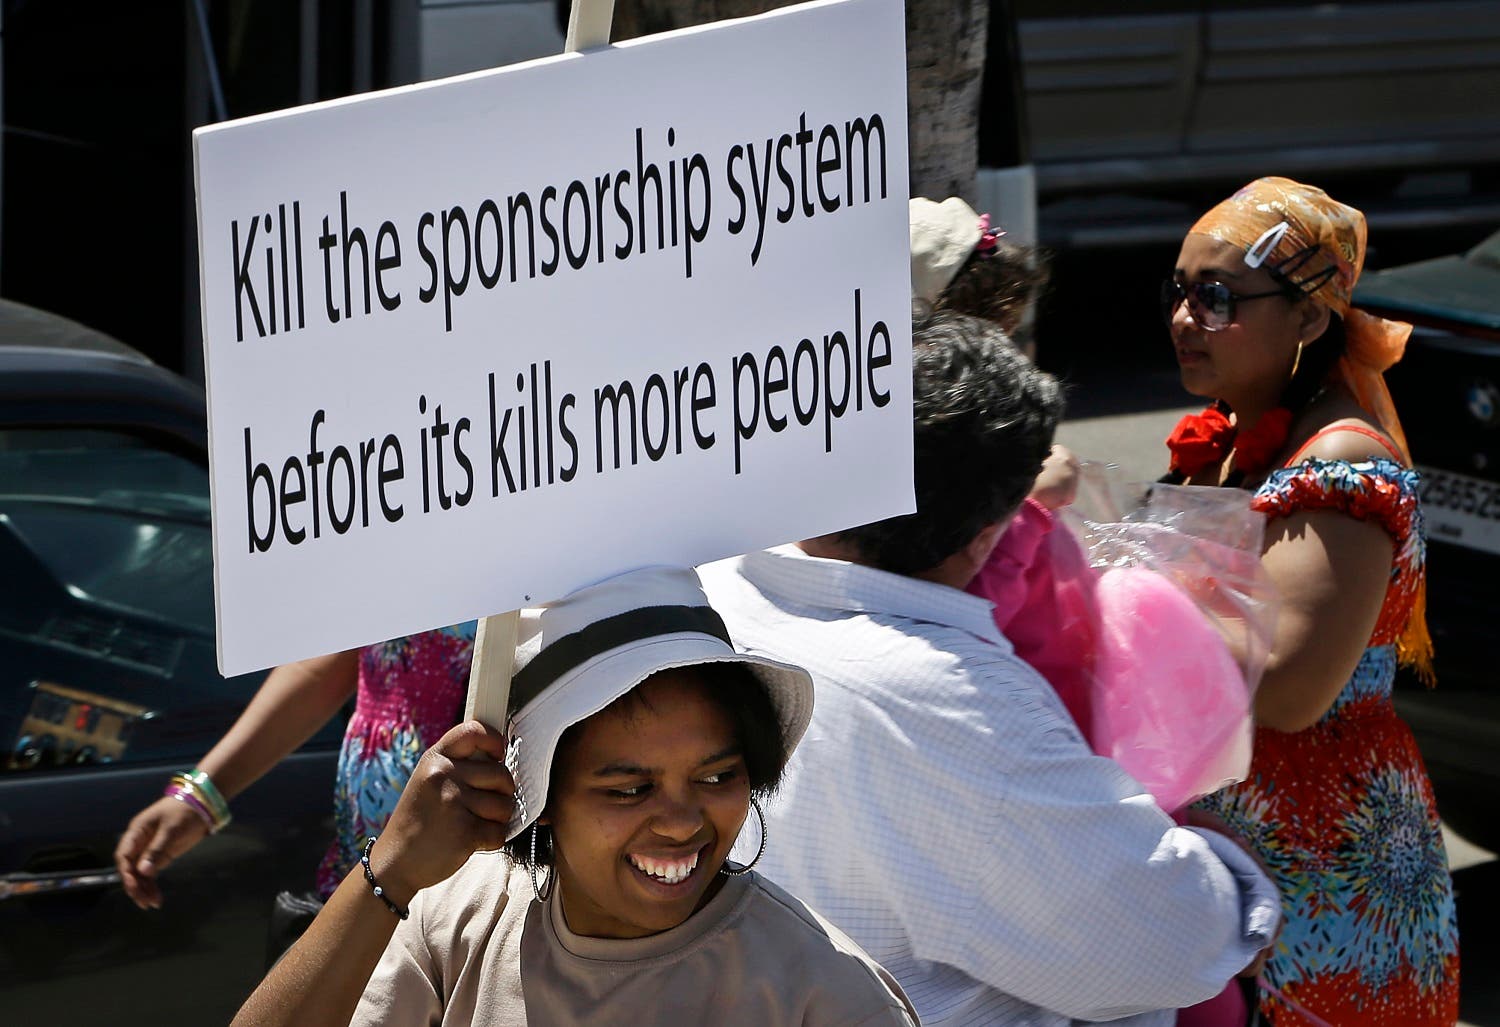 A migrant domestic worker, holds a banner demanding basic labor rights as Lebanese workers, during a march at Beirut's seaside, Lebanon. (File photo: The Associated Press)